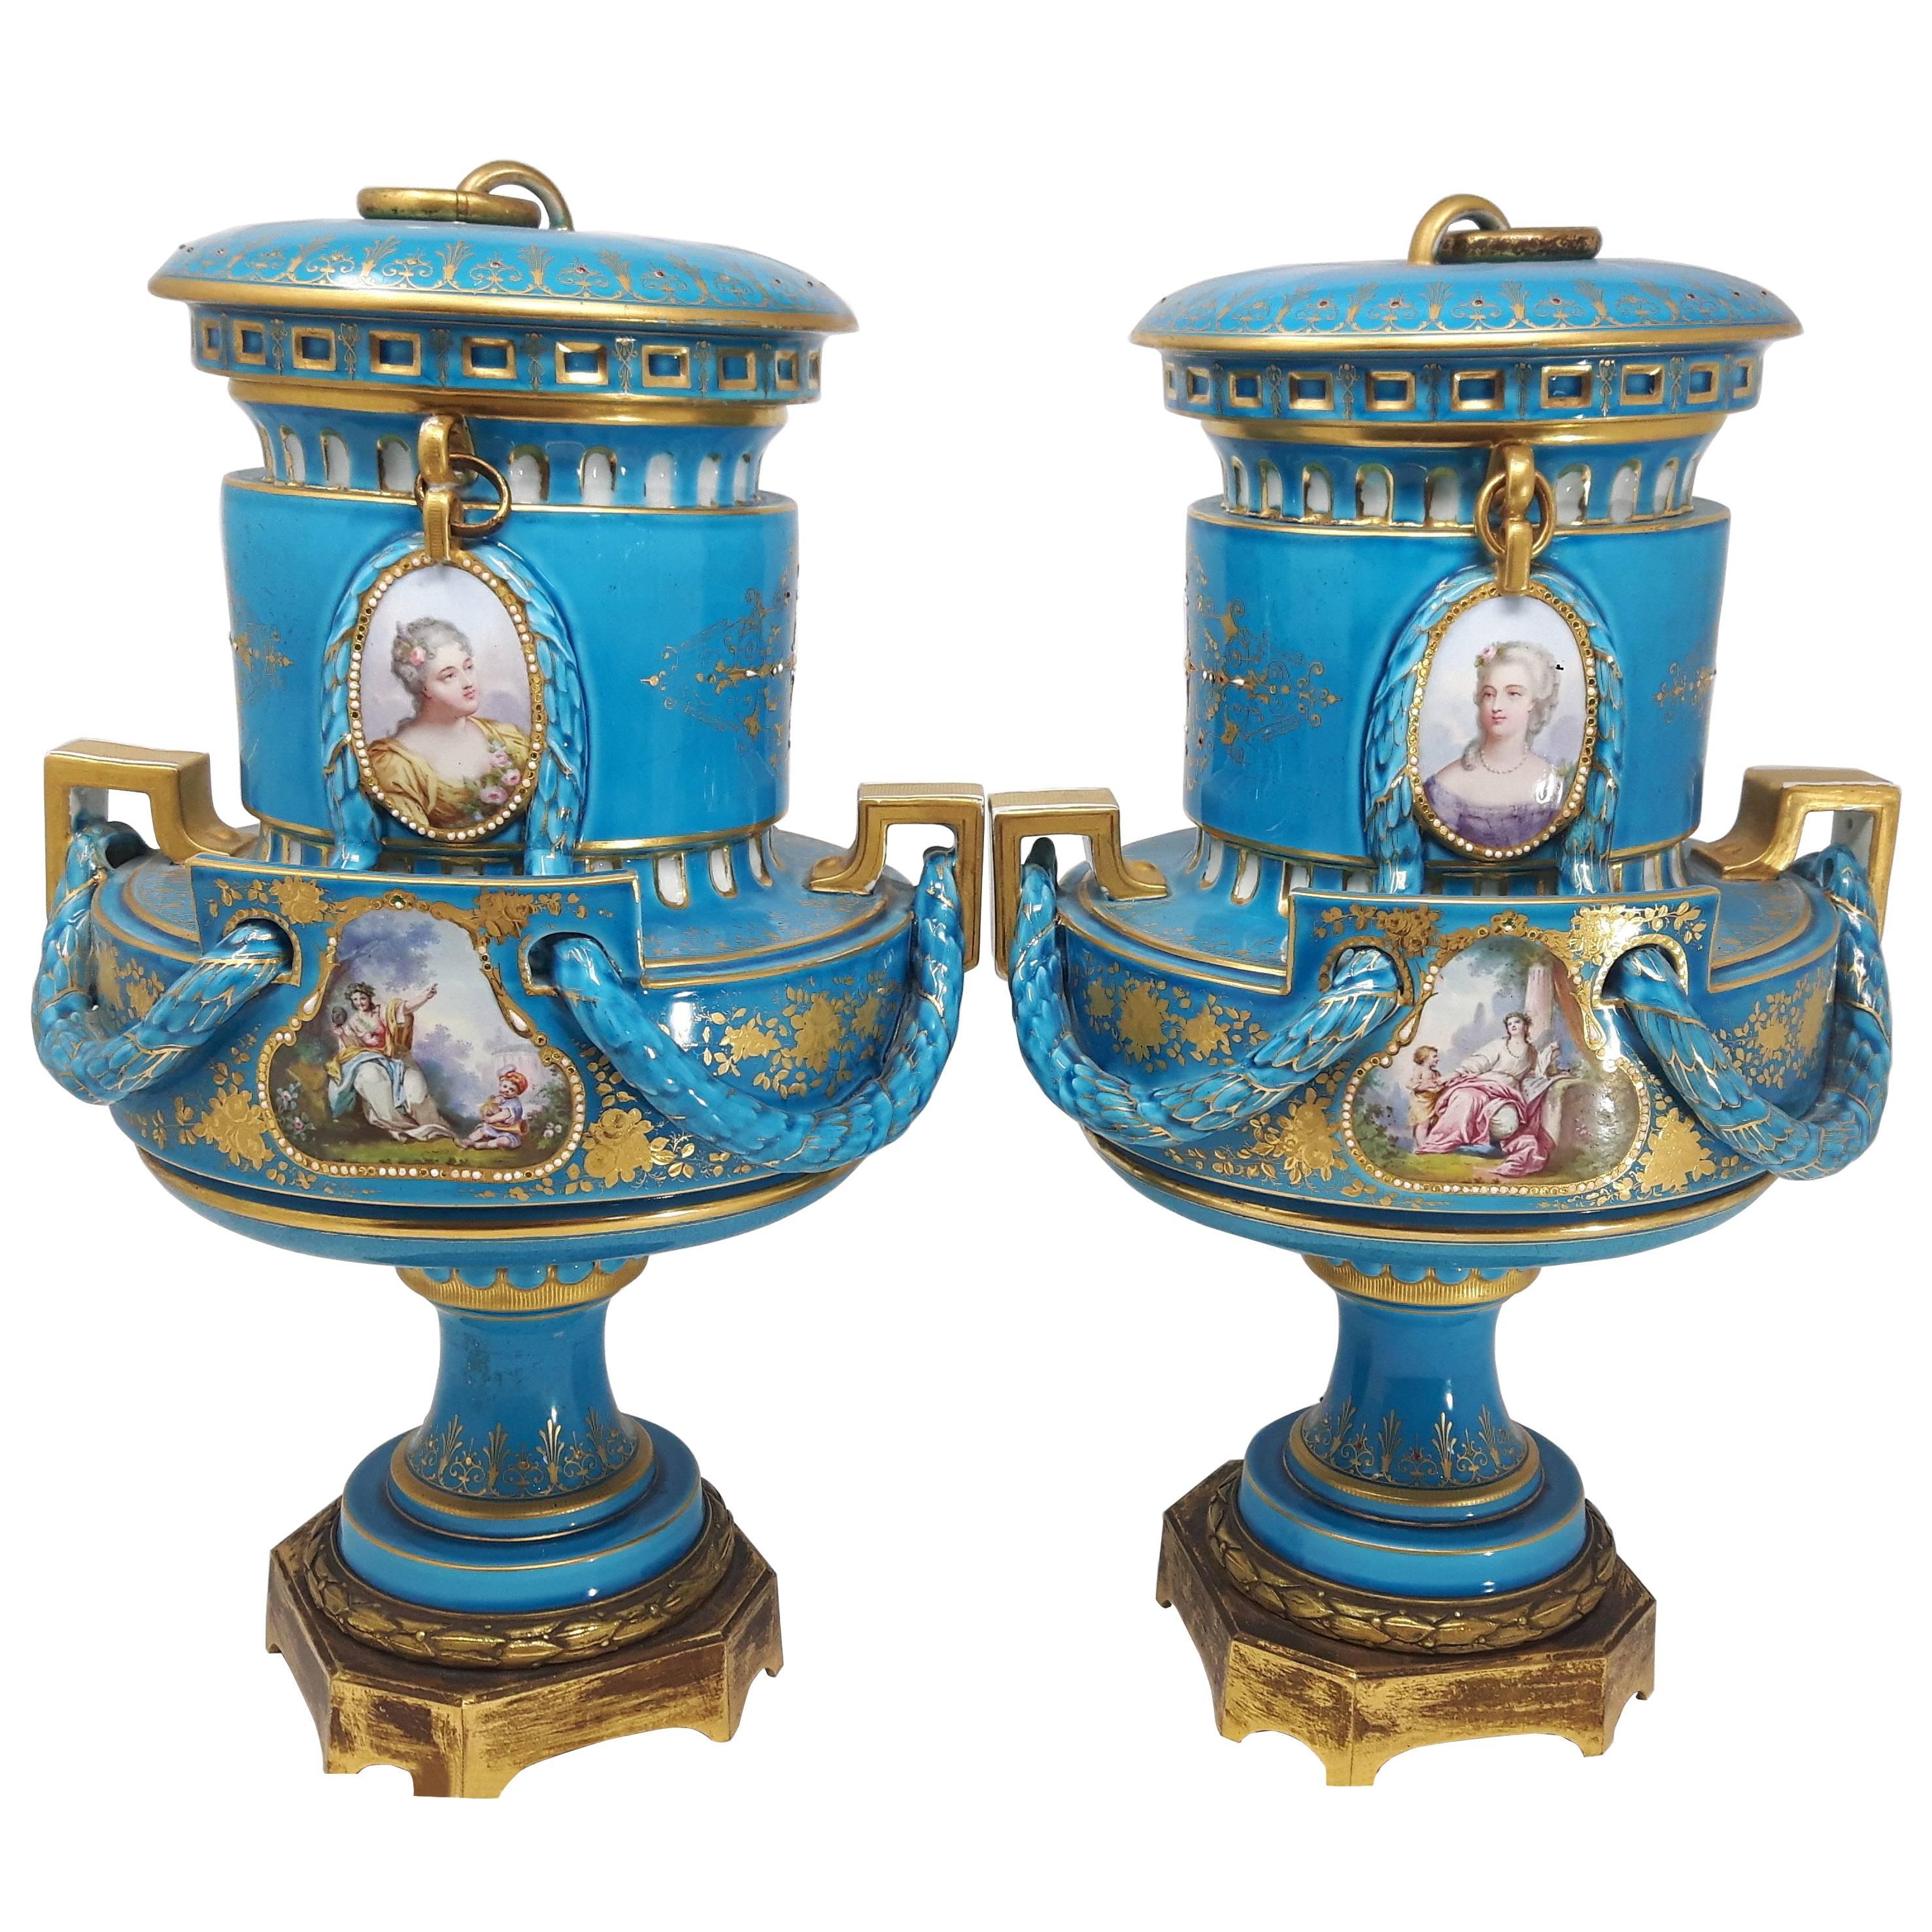 Pair of French Provincial 19th Century Porcelain Serve Vases, circa 1870